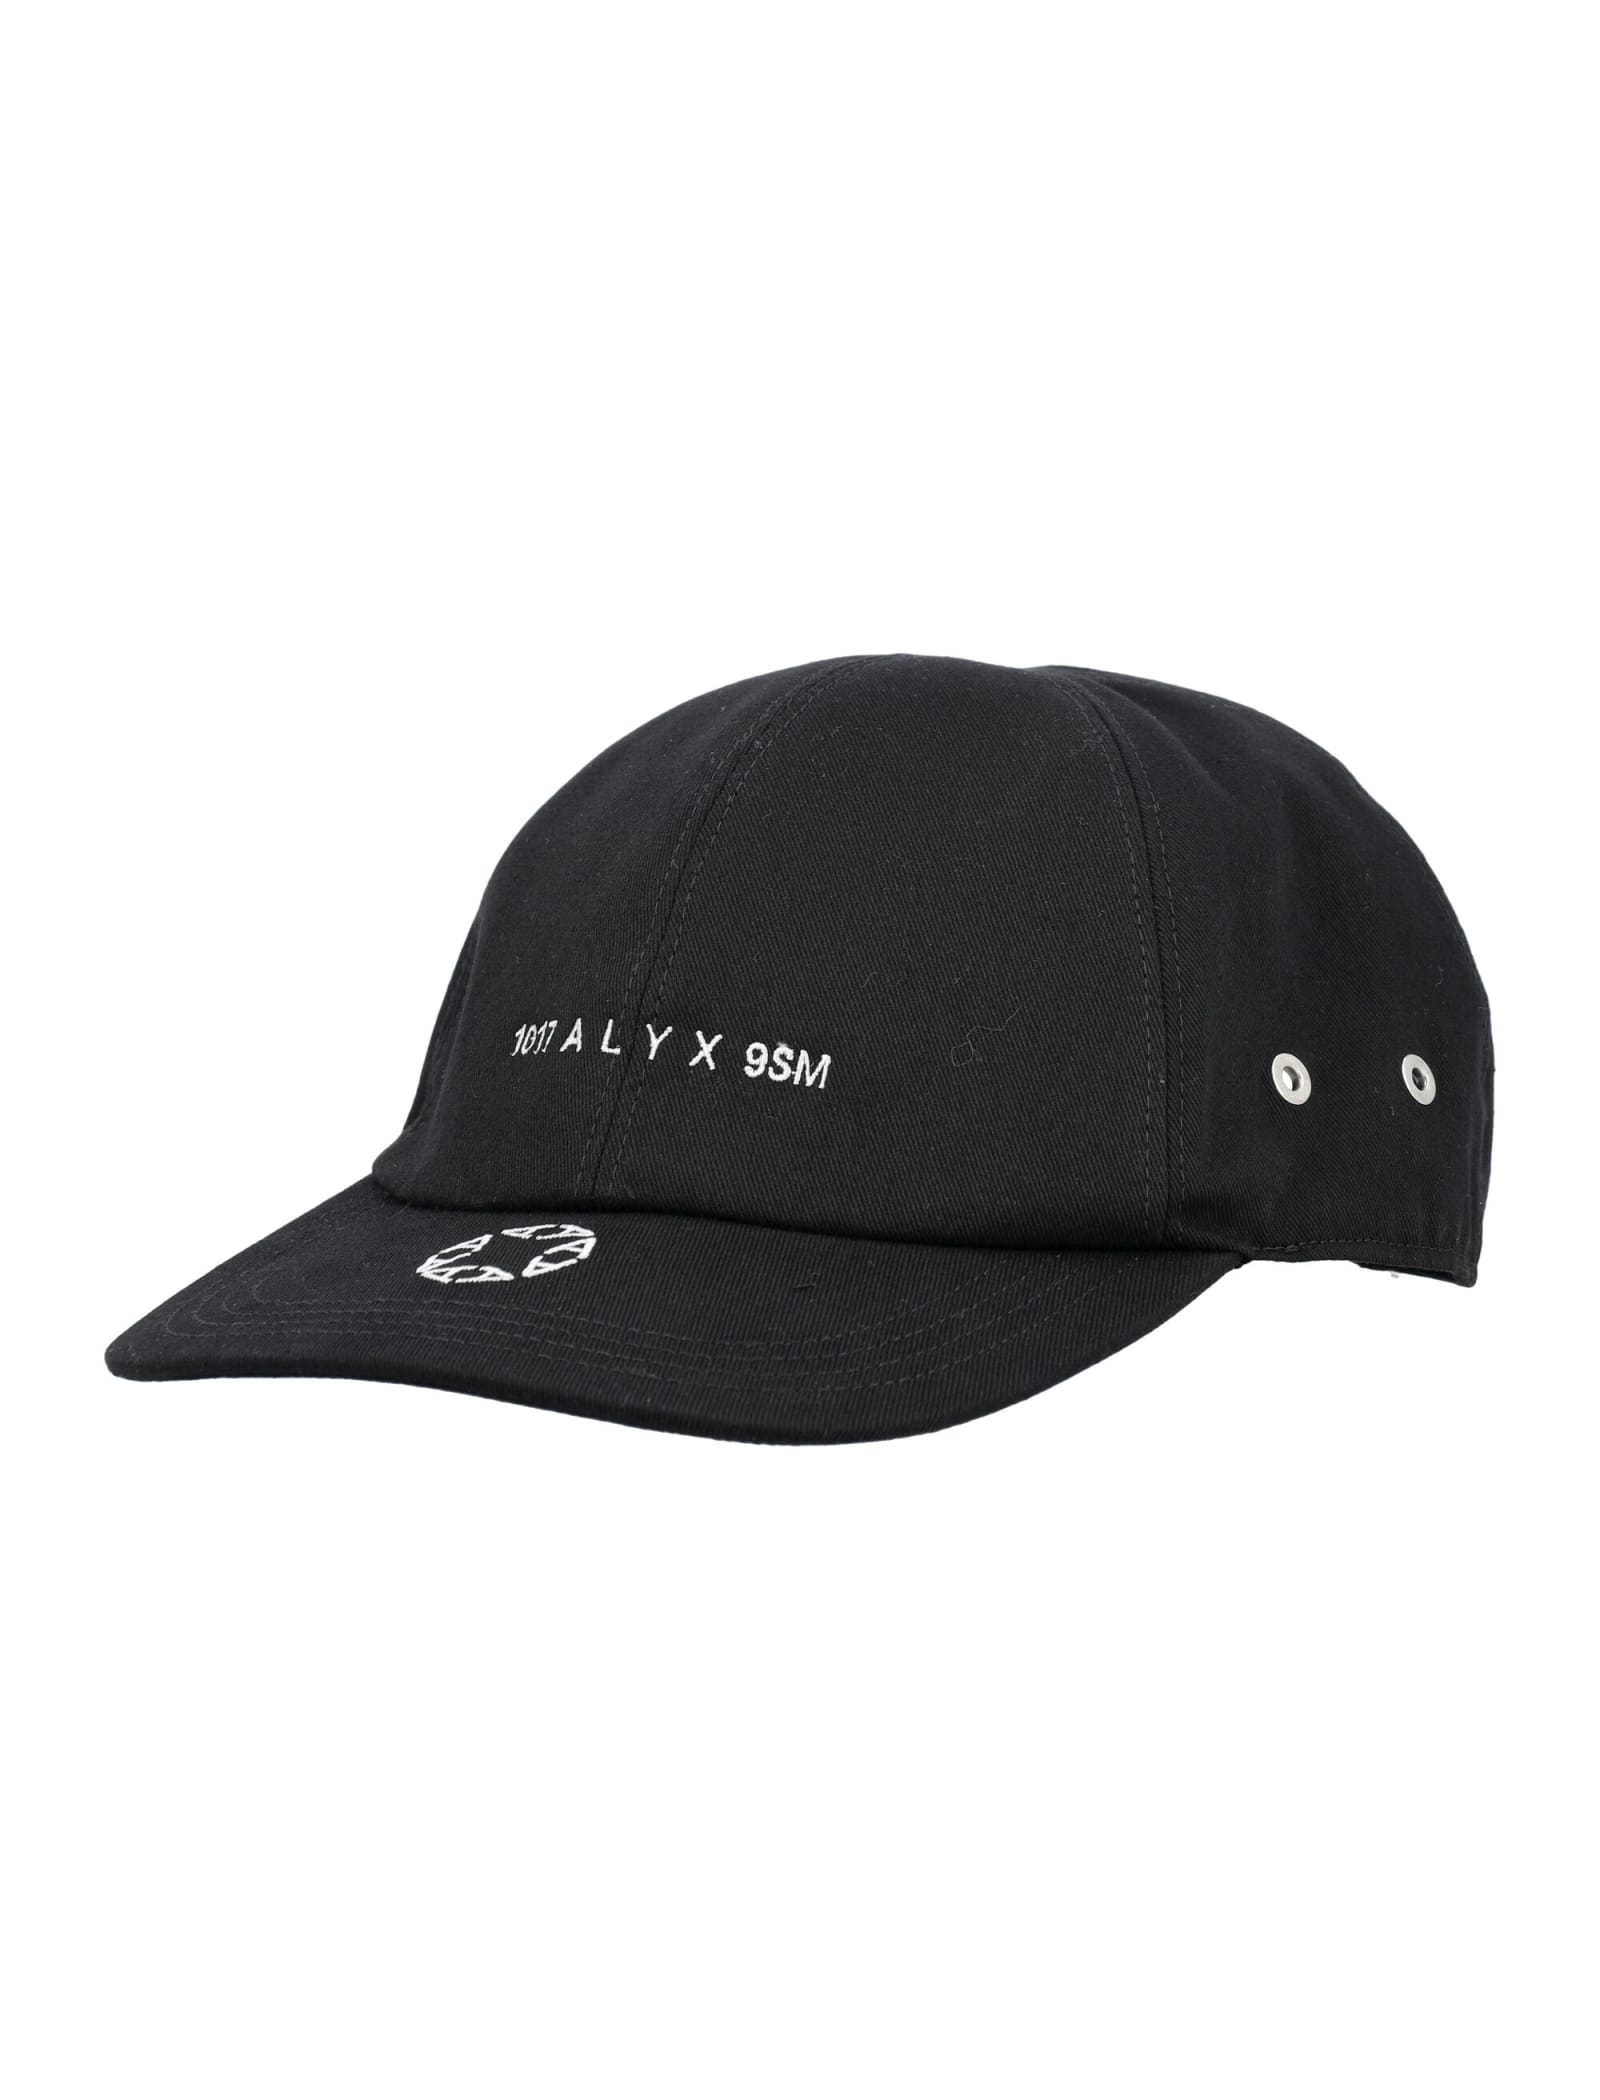 Alyx 1017 9sm Logo Embroidery Hat In Black | ModeSens